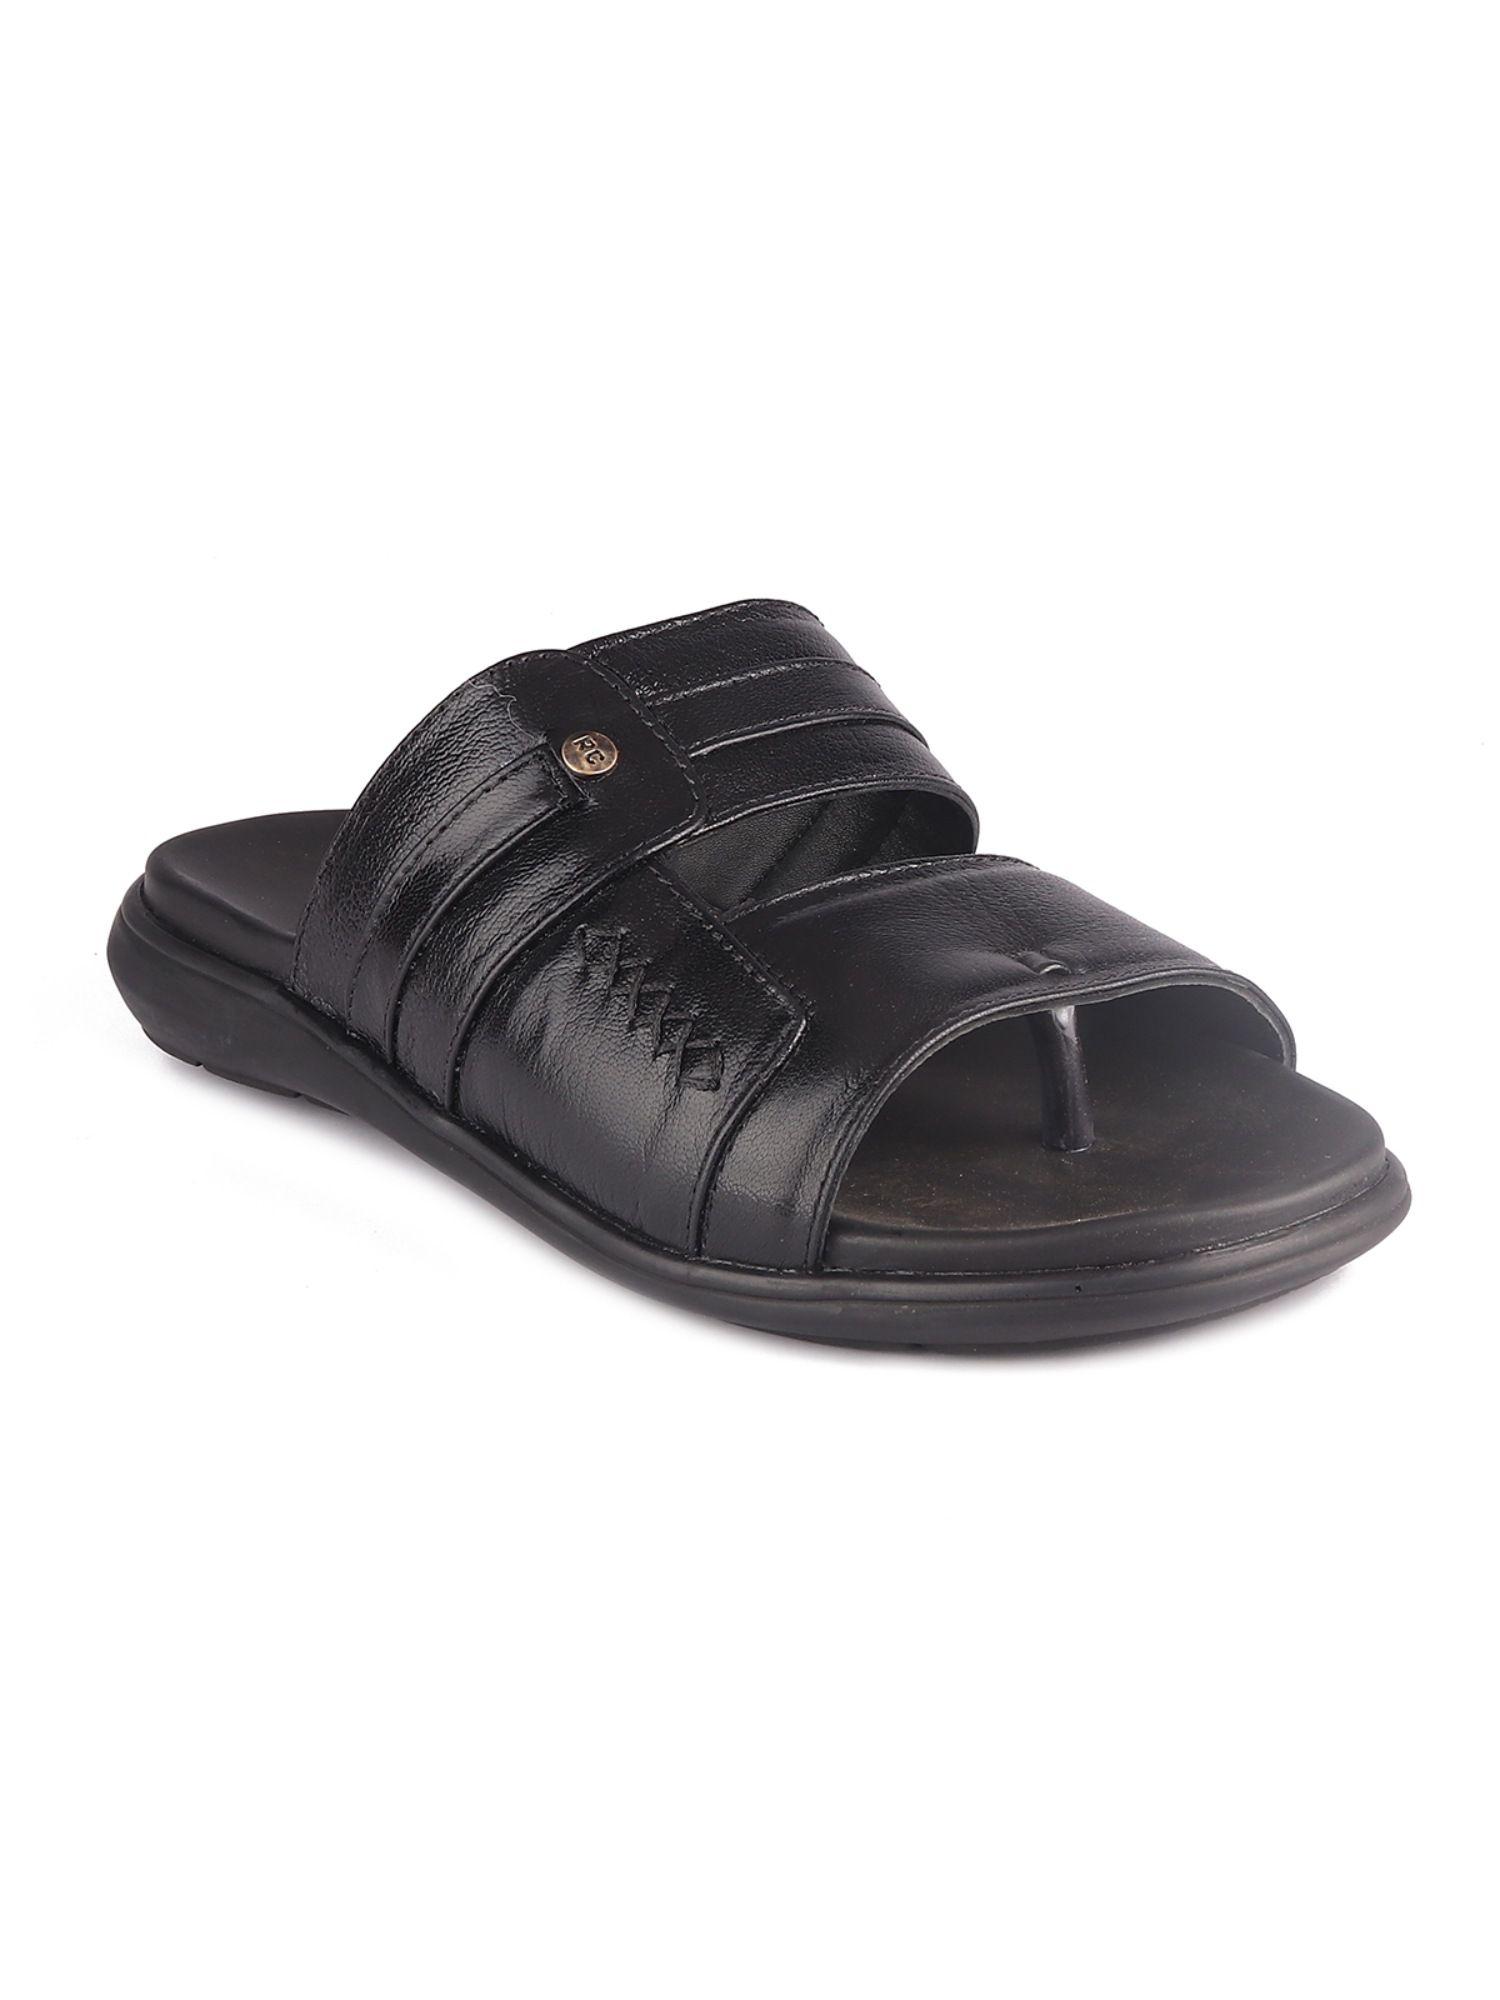 black-leather-casual-solid-classic-slipper-for-men